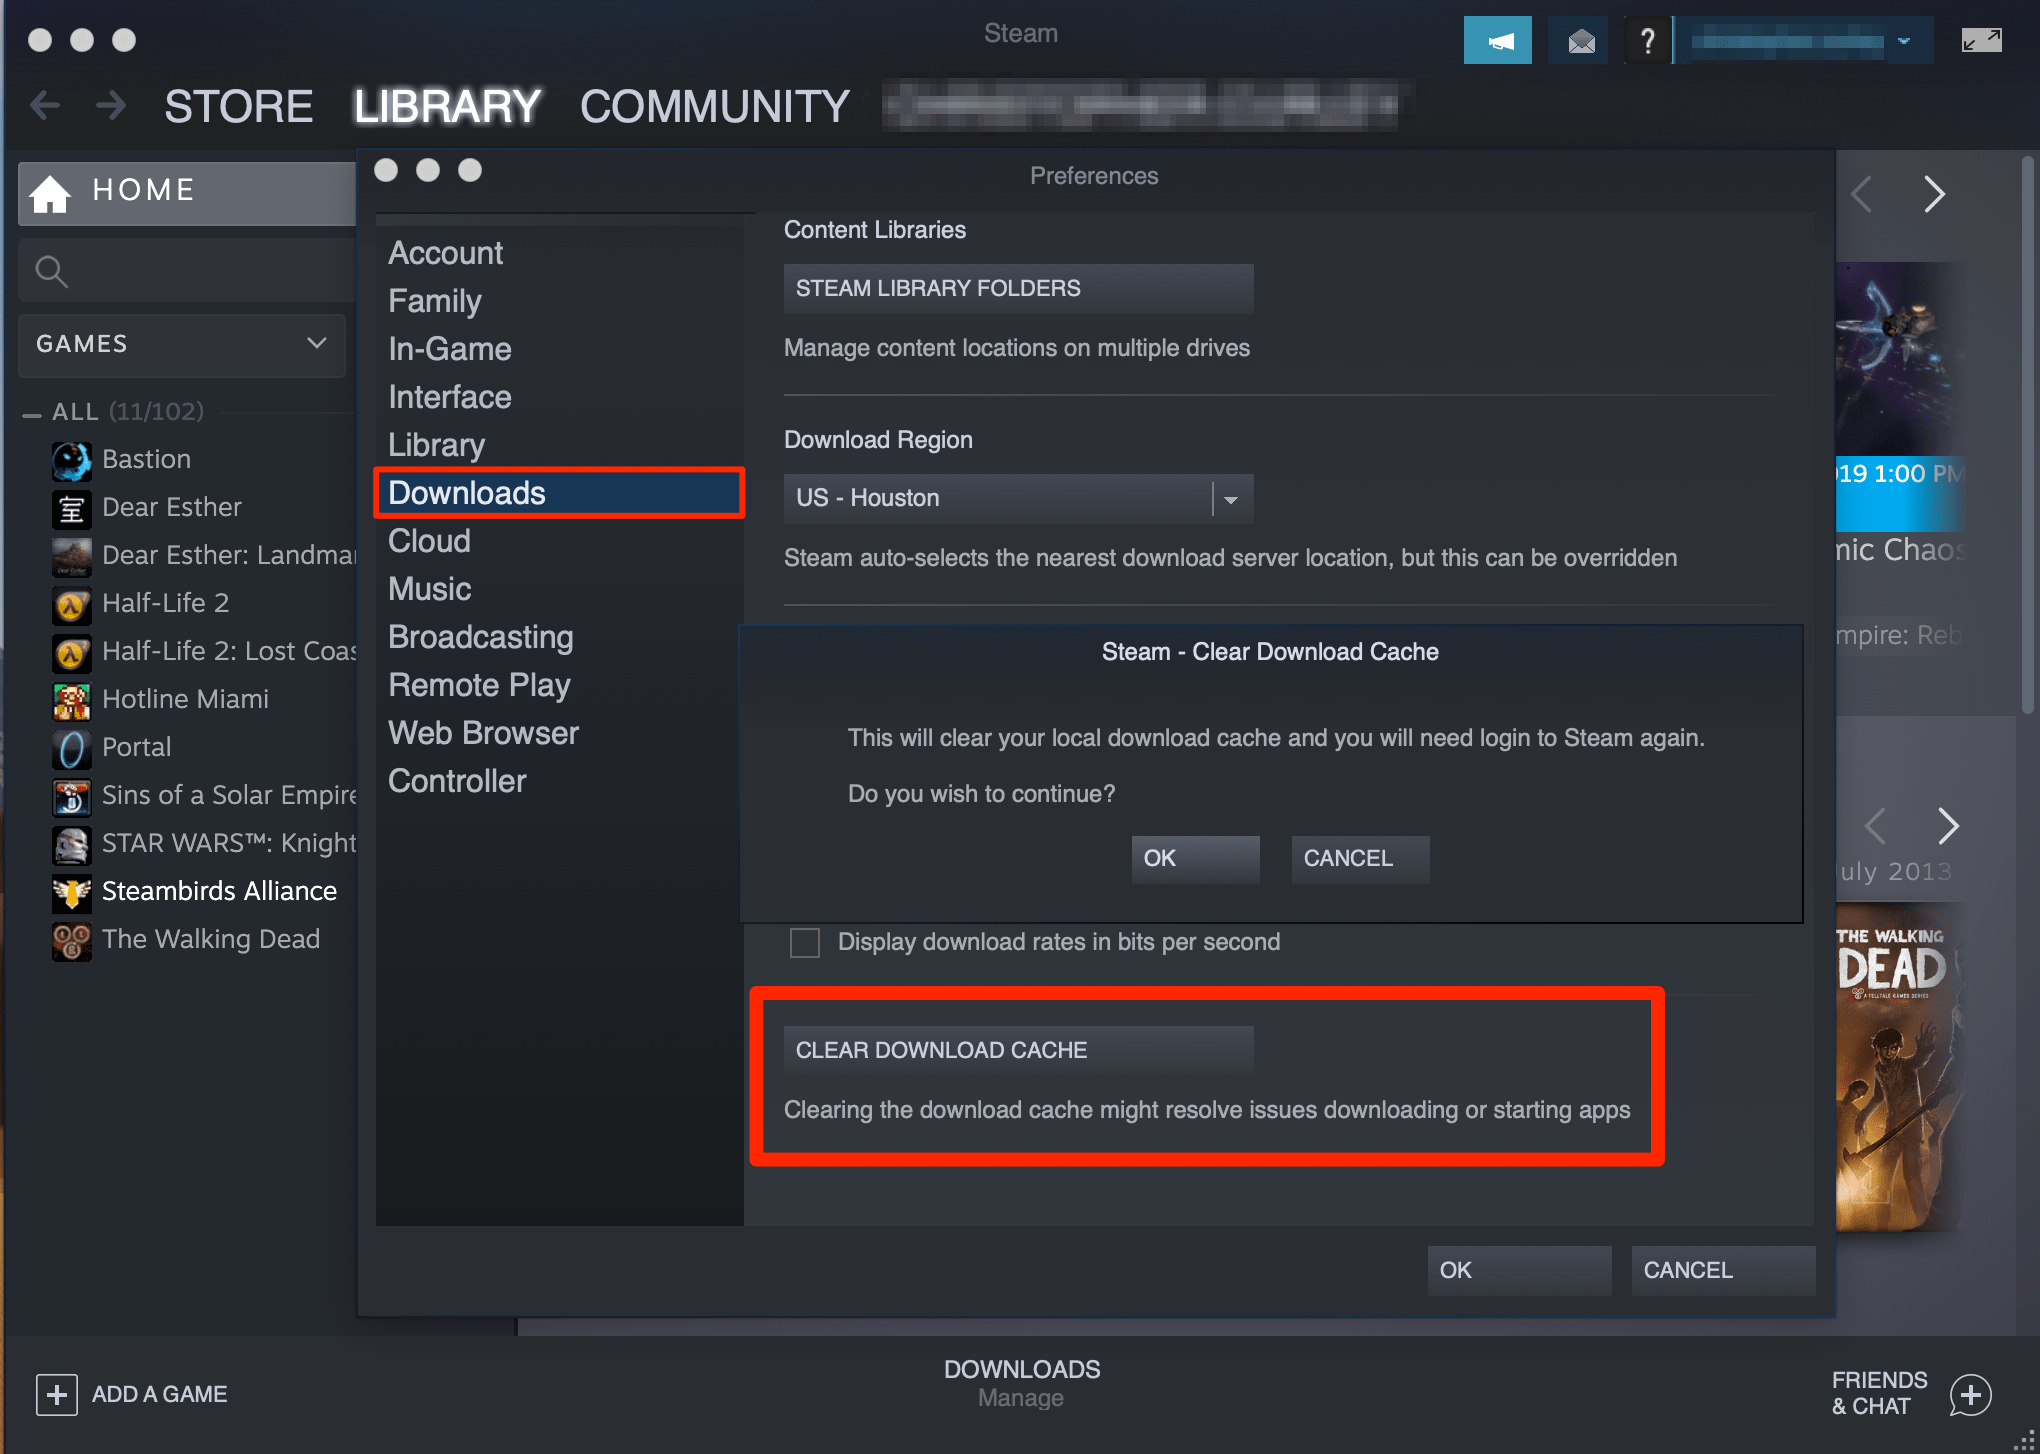 Click on "Clear Download Cache"
Restart Steam and check if the connection error persists